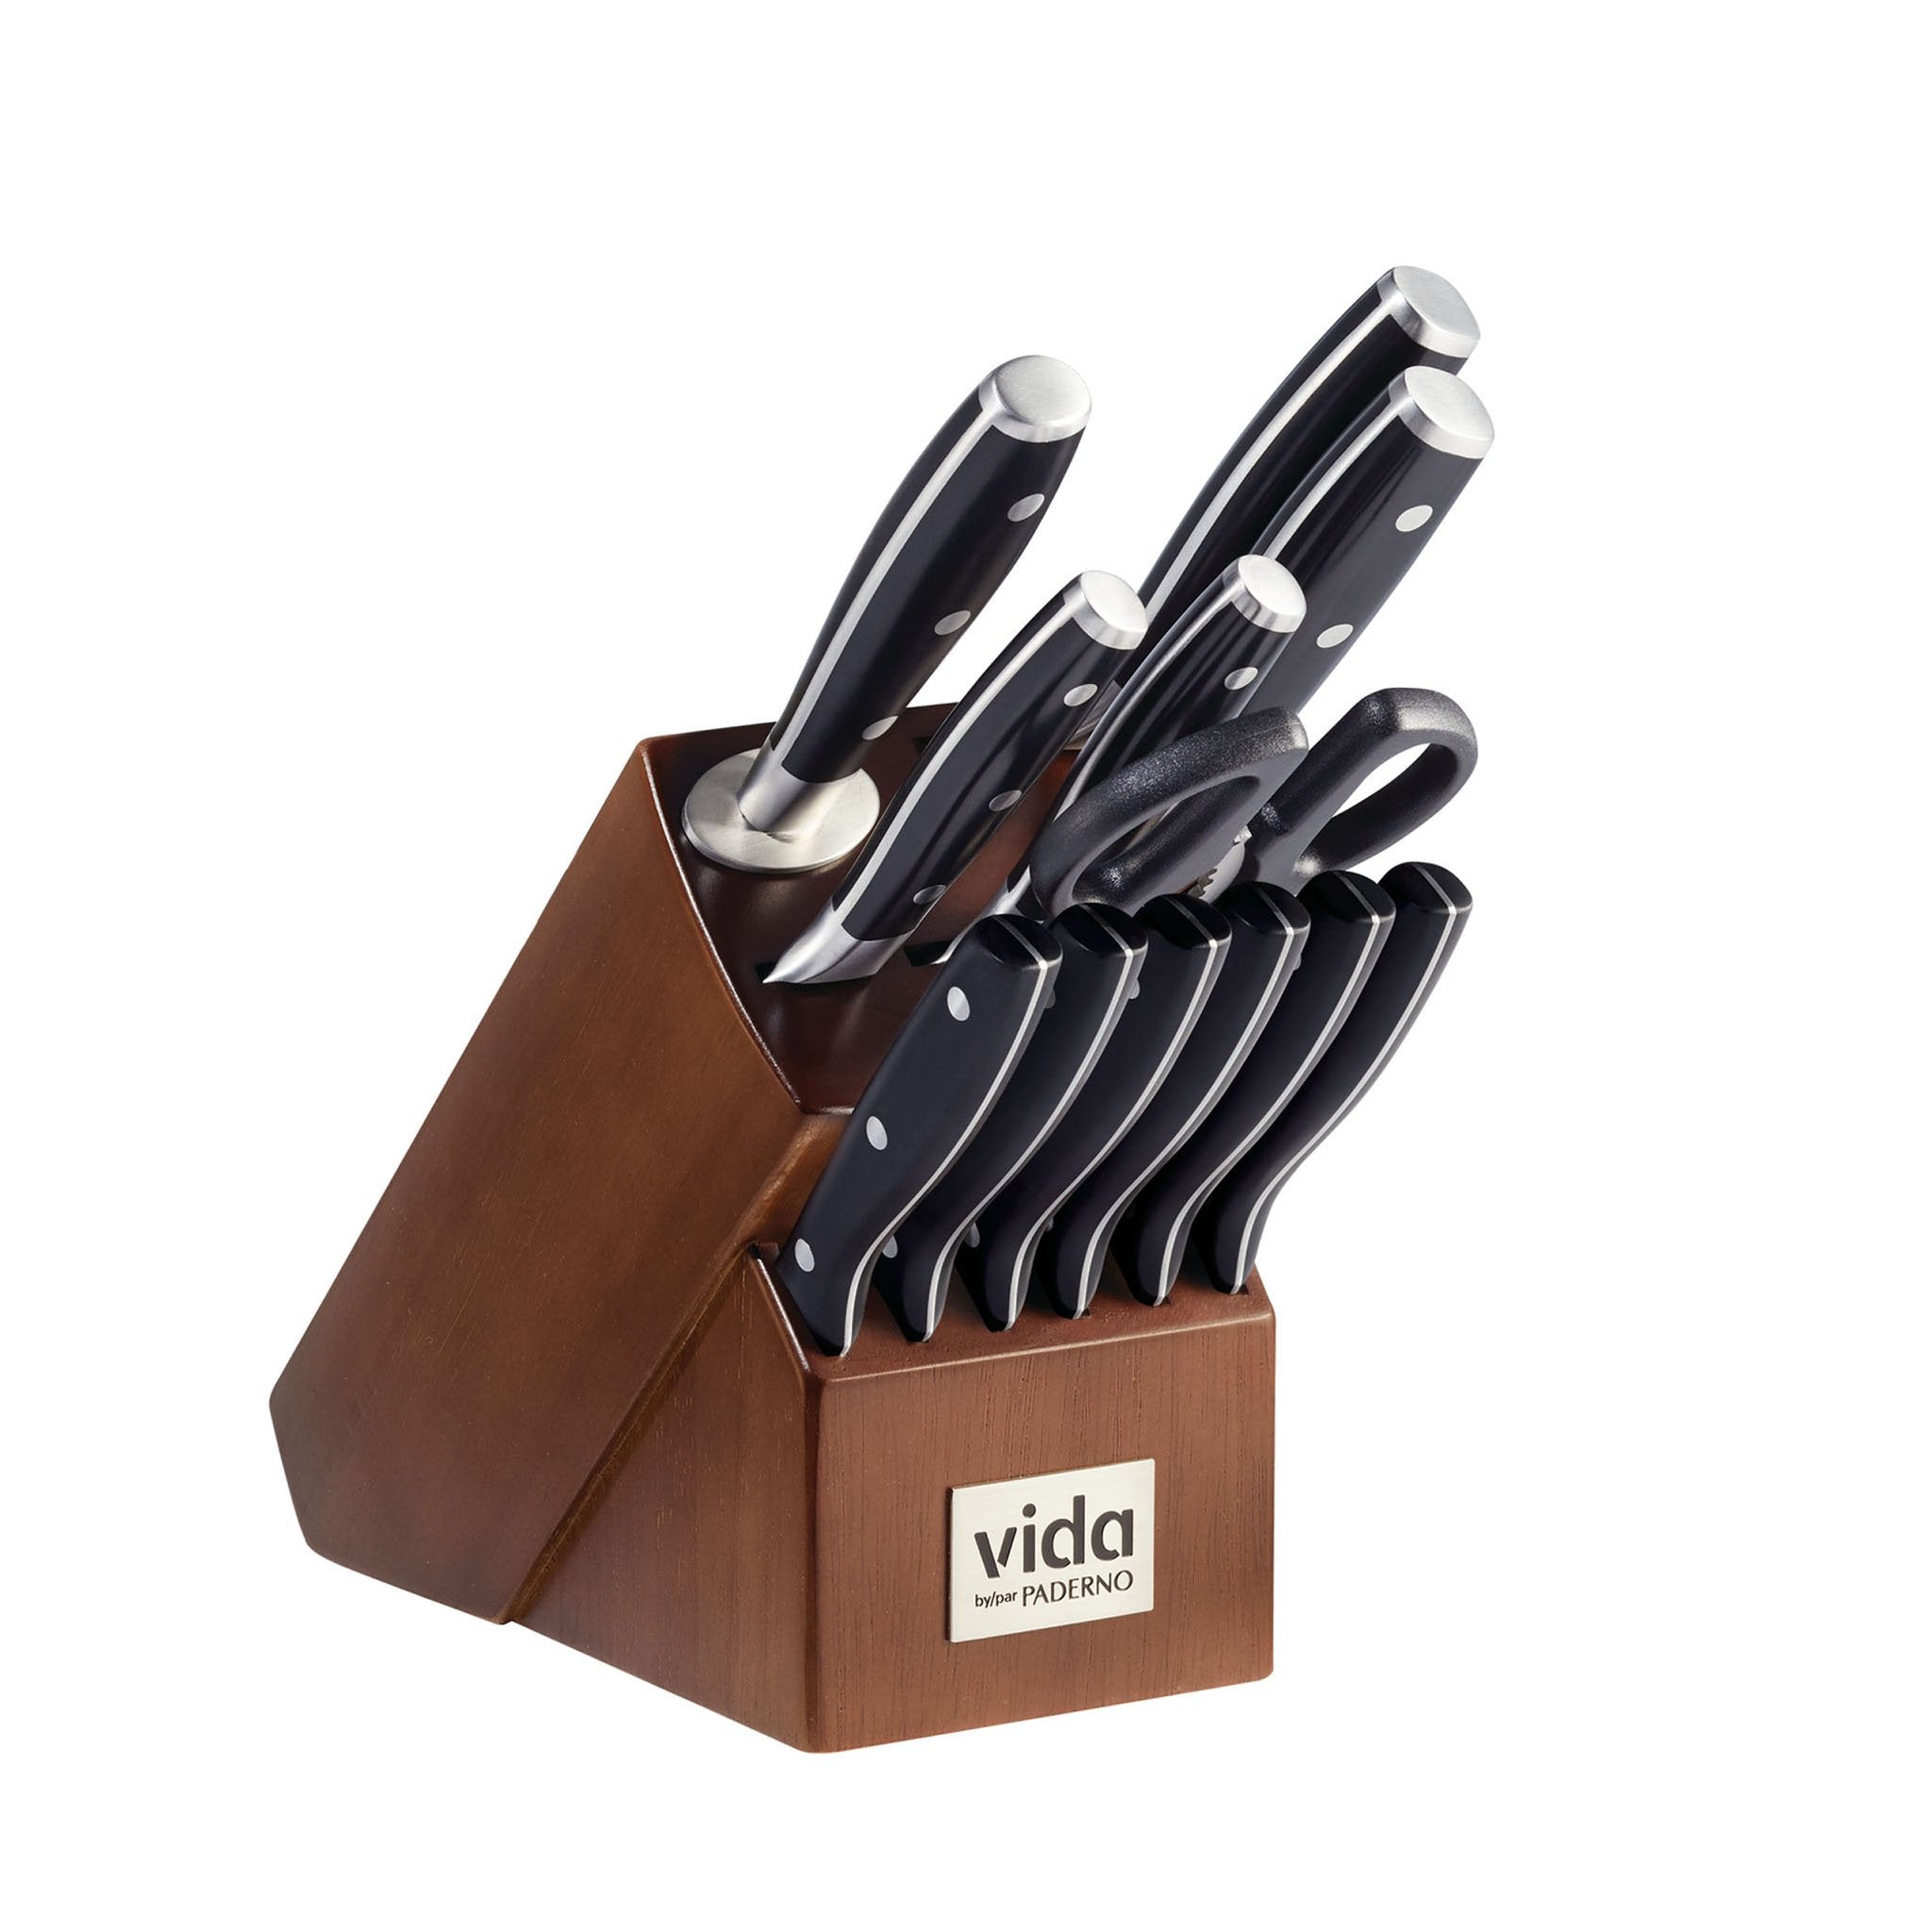 9 Steel and Knife Sharpener - Classic® Forged Triple Rivet Cutlery 